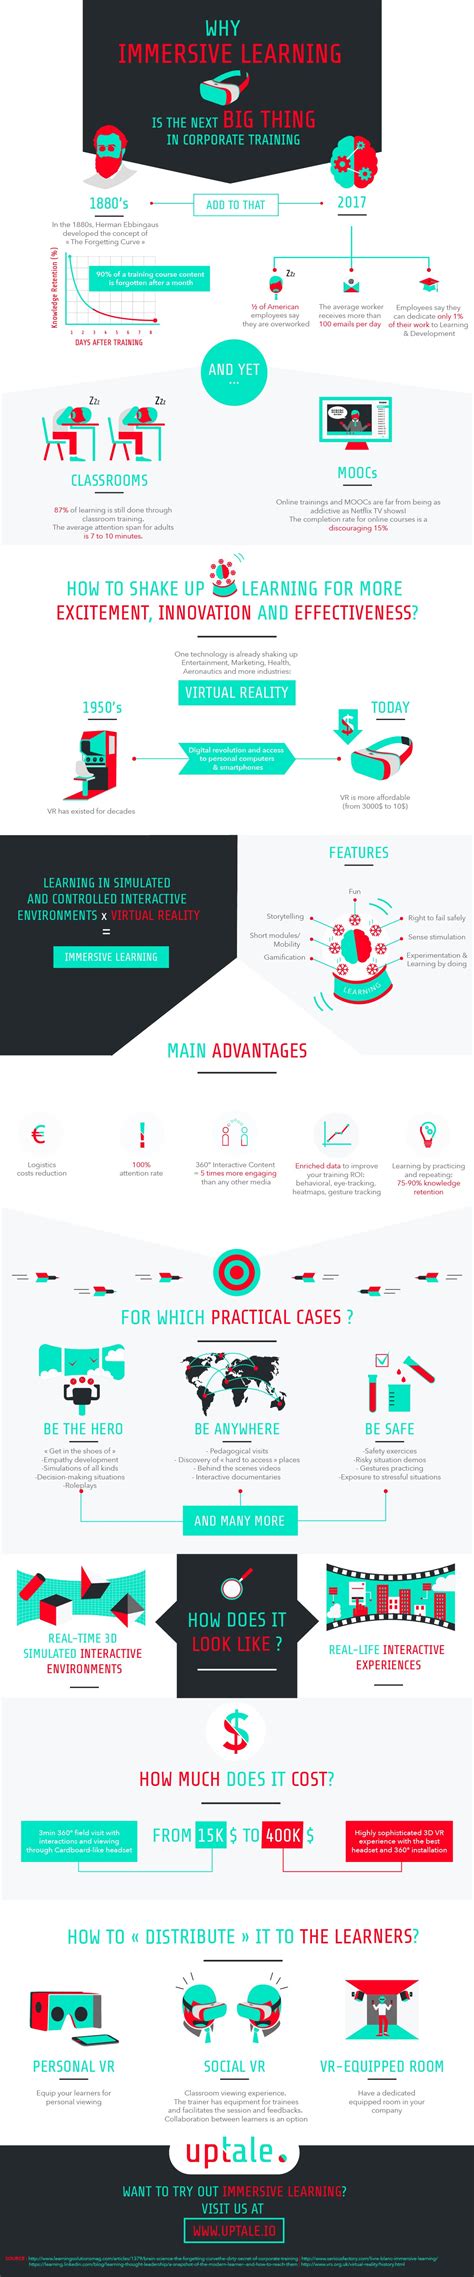 Immersive Learning In Corporate Training Infographic E Learning